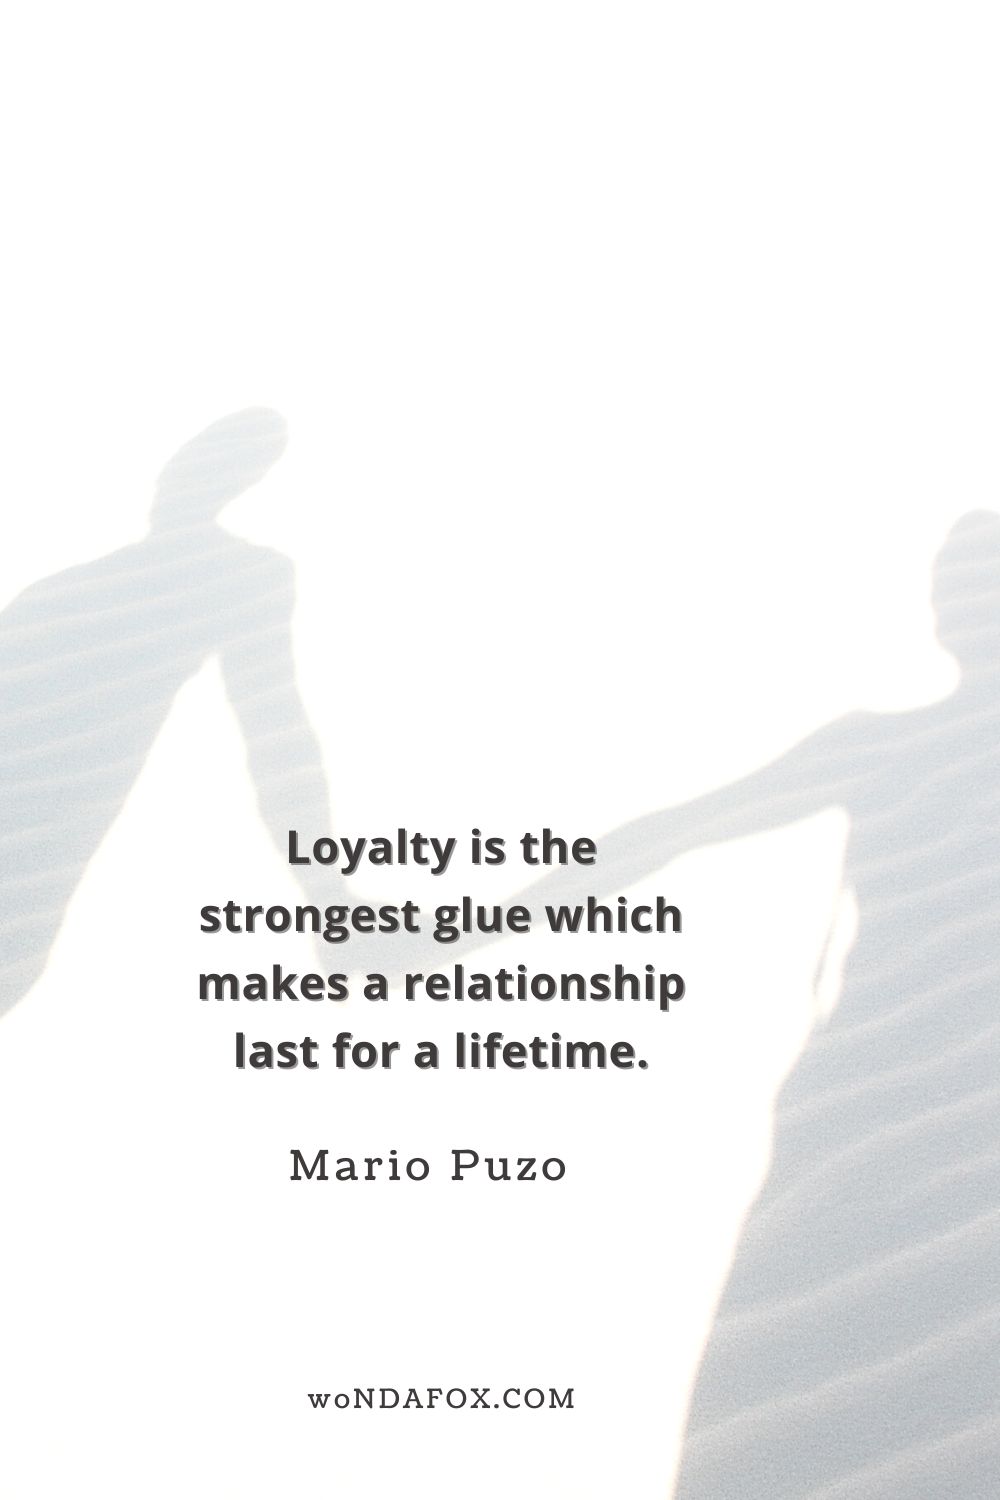 “Loyalty is the strongest glue which makes a relationship last for a lifetime.” 